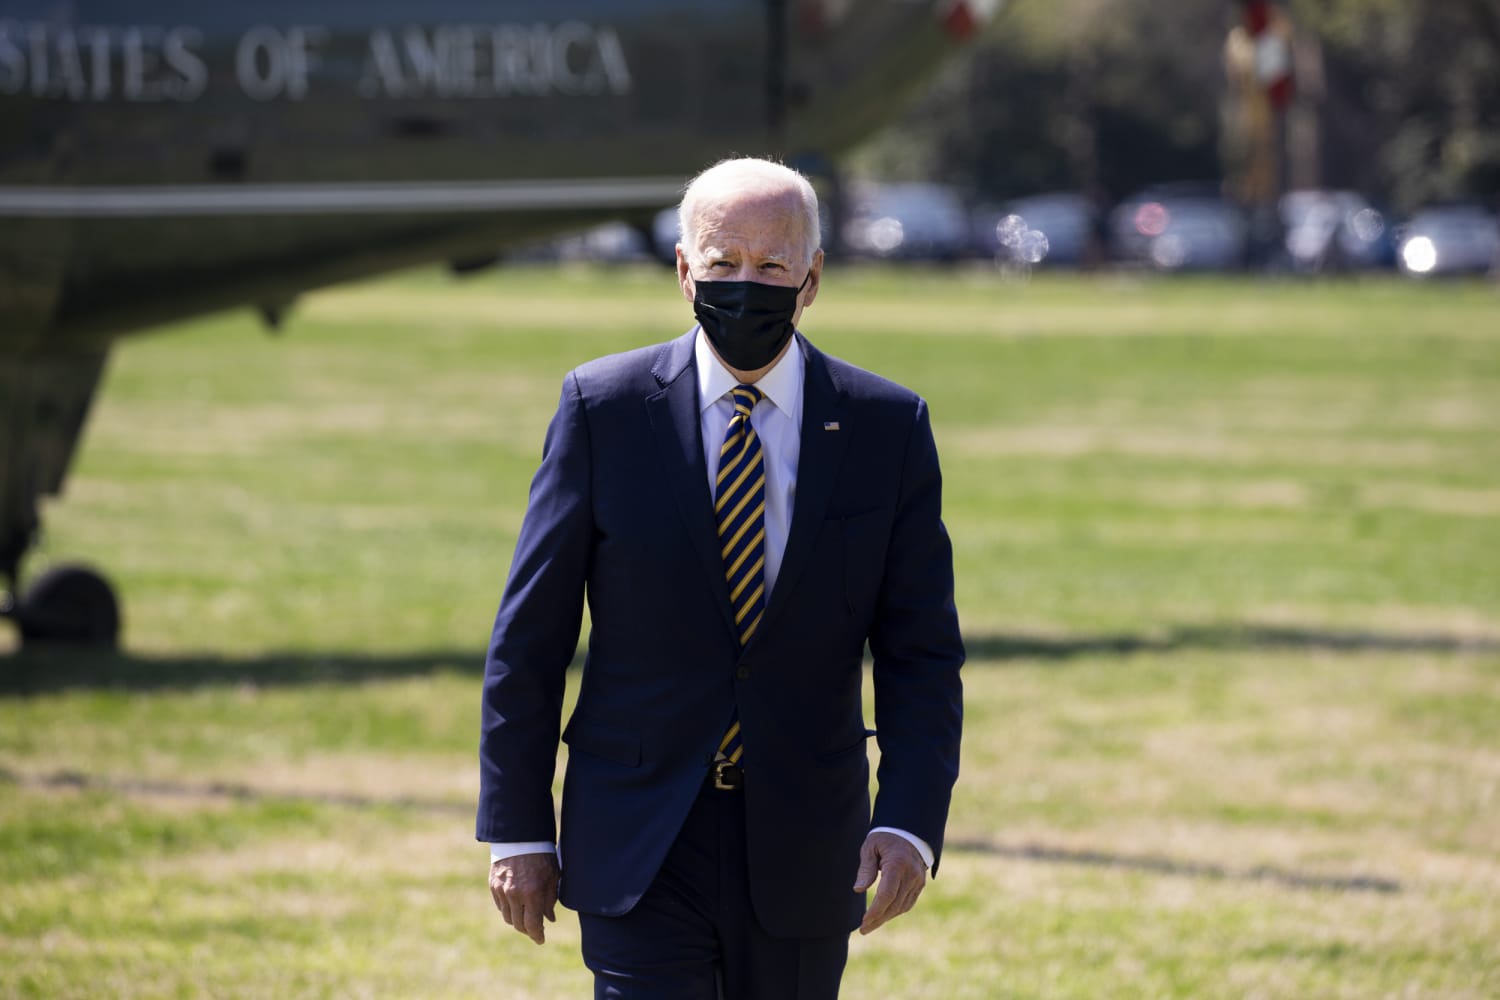 The Biden administration will release new Title IX rules in May